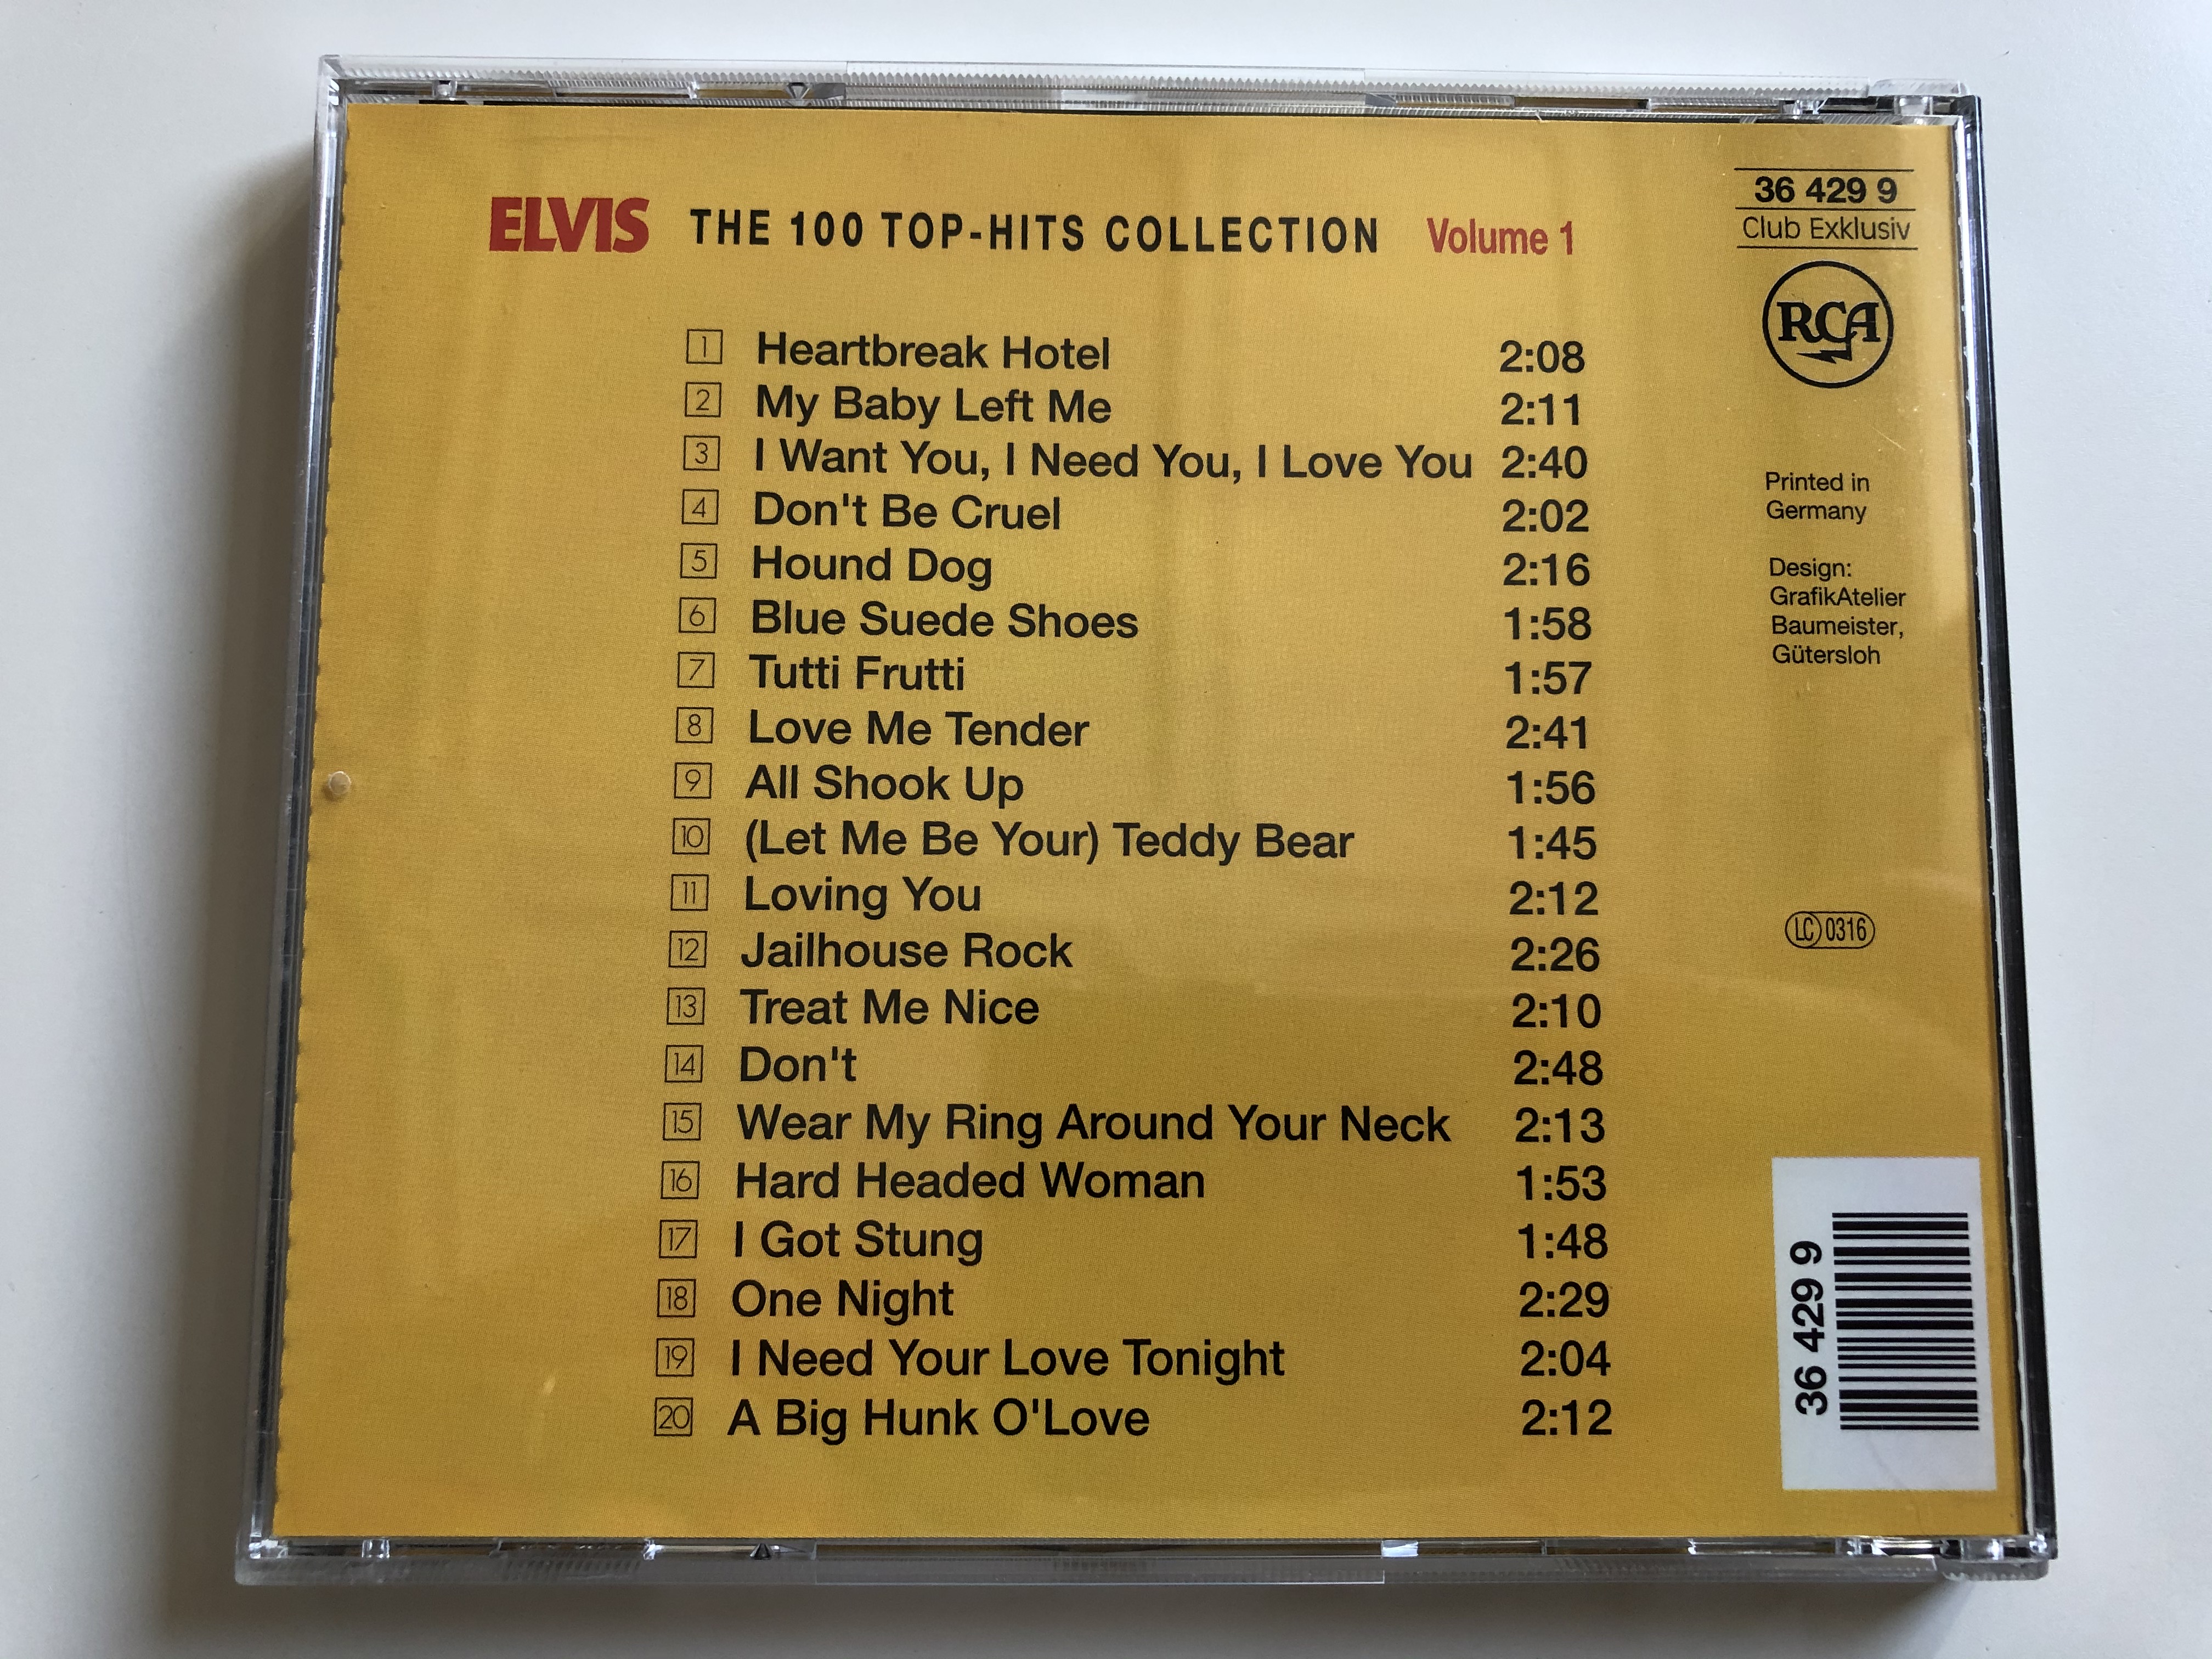 elvis-the-100-top-hits-collection-rca-5x-audio-cd-box-set-1997-stereo-36-428-1-8-.jpg